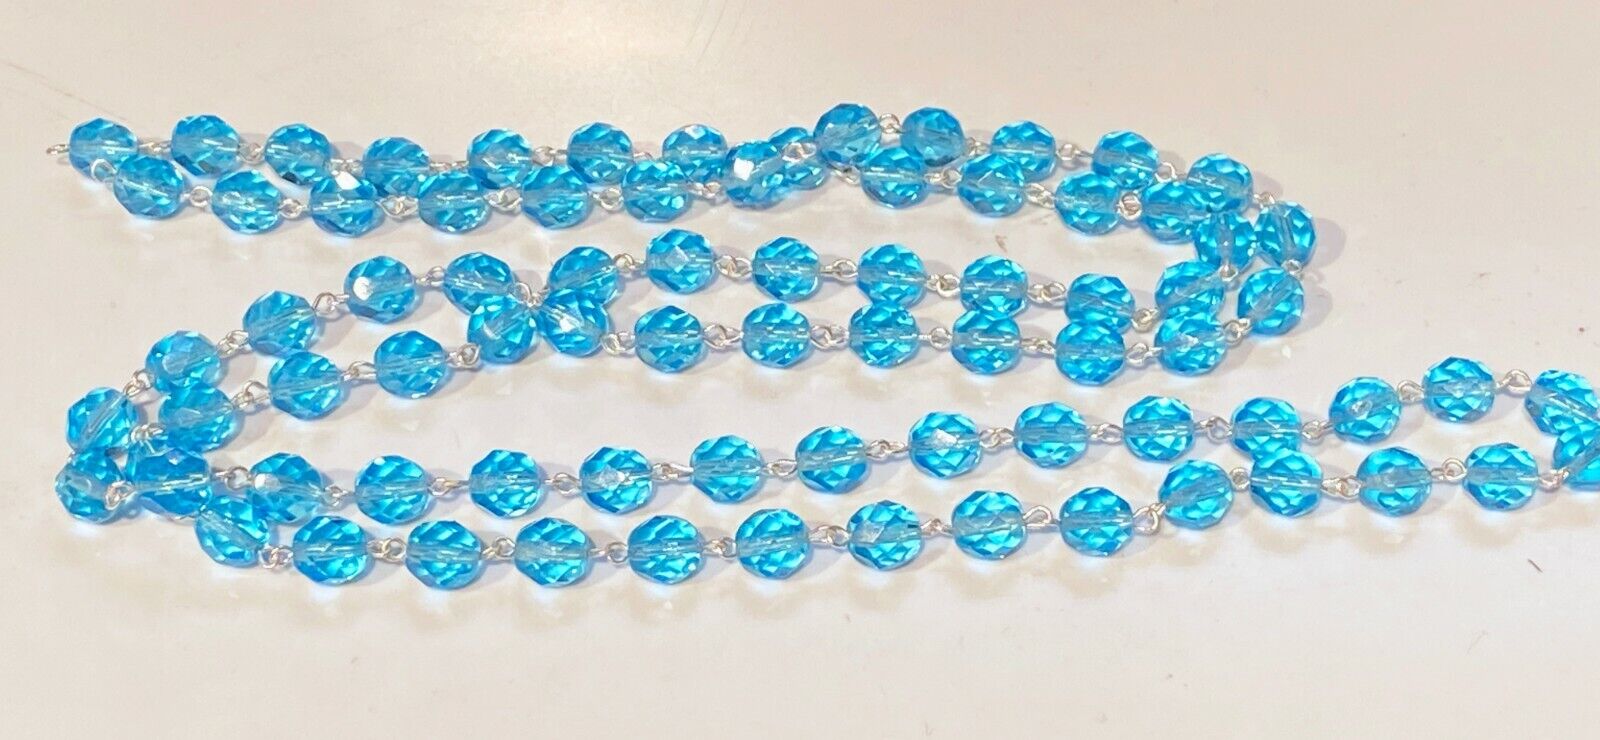 NEW: 1 meter AQUA TEAL Crystal Rosary Chain Silver, 8mm faceted round beads  